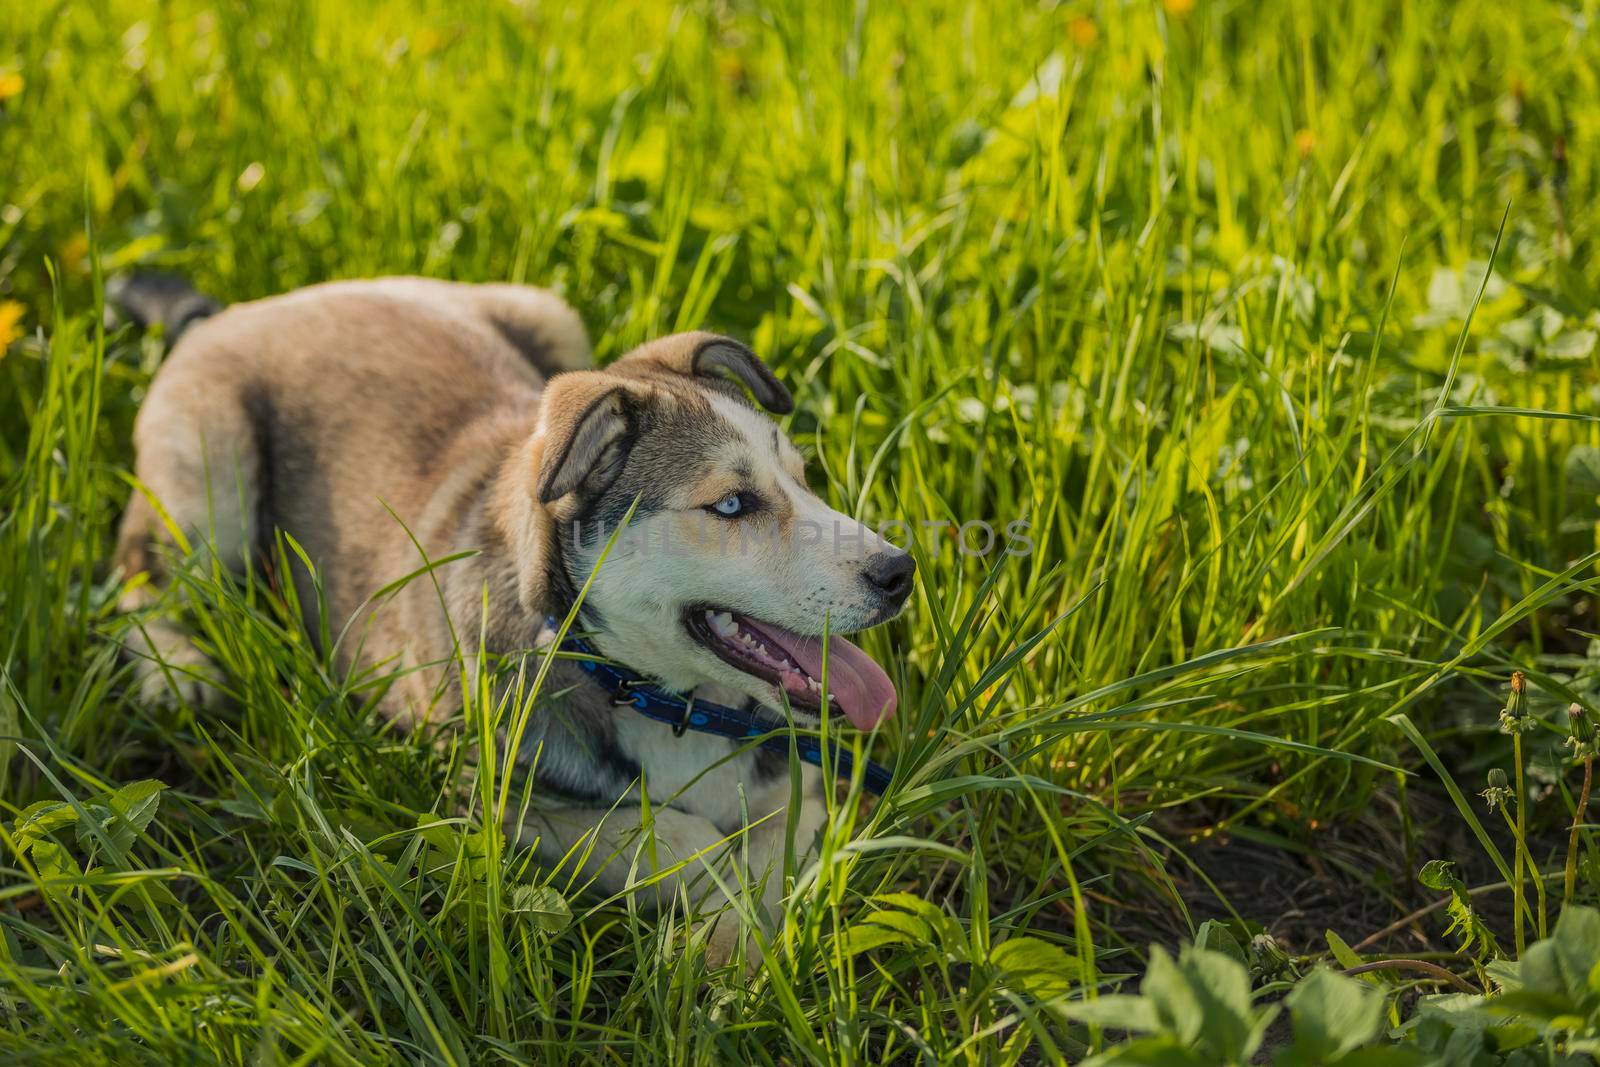 close-up portrait of a dog sitting in the grass